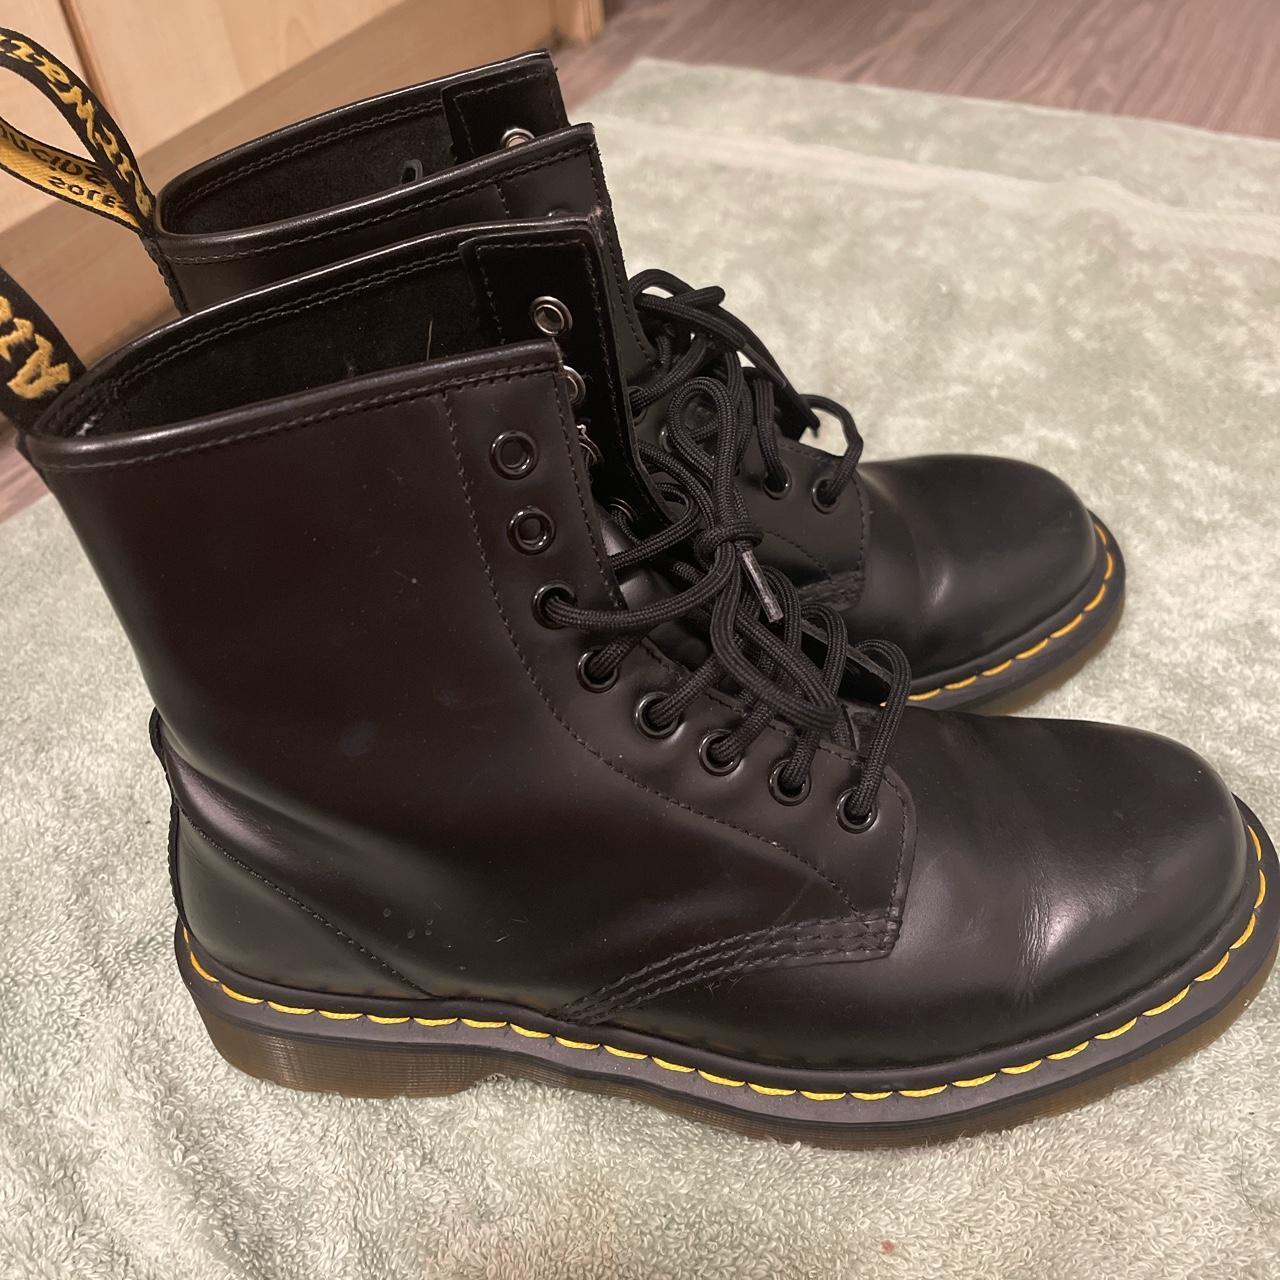 Dr Martens 1460 smooth leather lace up boots size... - Depop